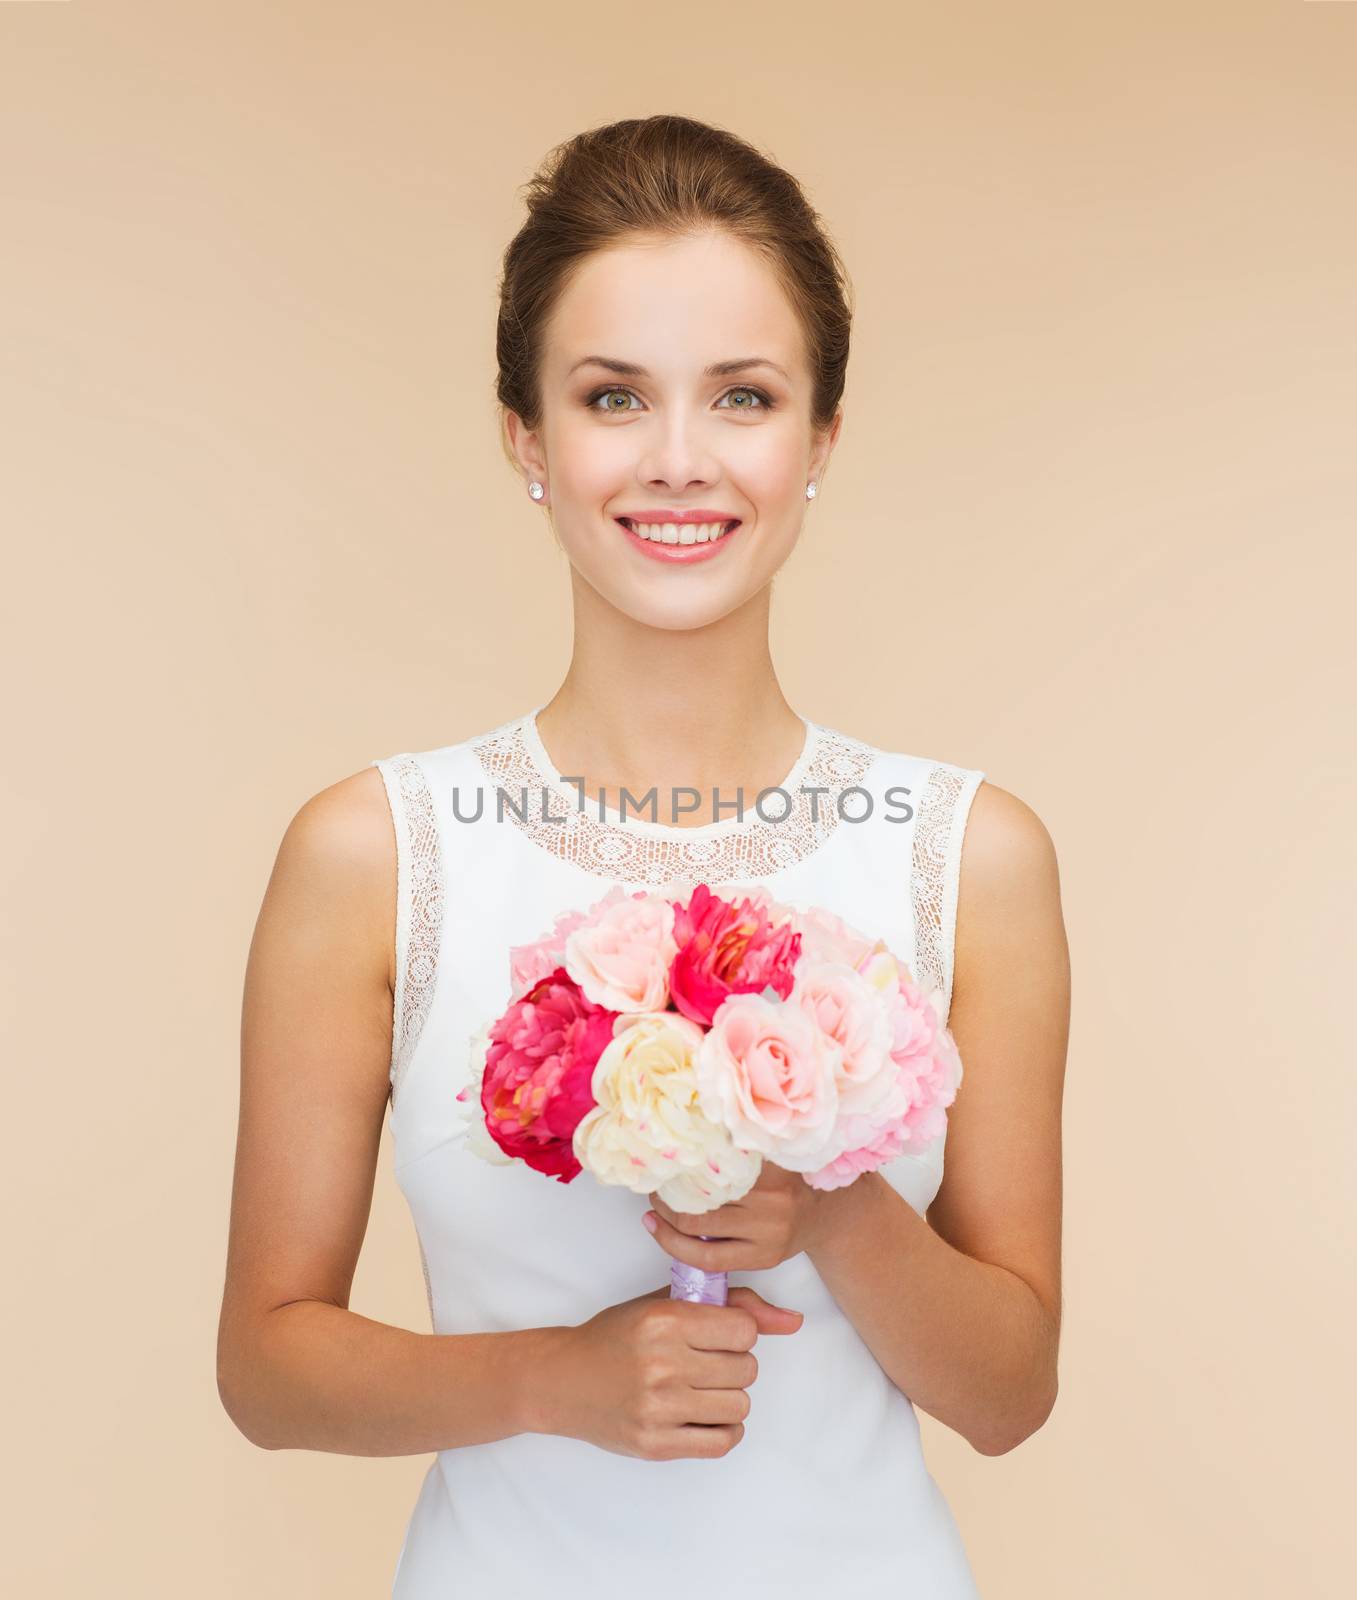 happiness, wedding, holidays and celebration concept - smiling bride or bridesmaid in white dress with bouquet of flowers